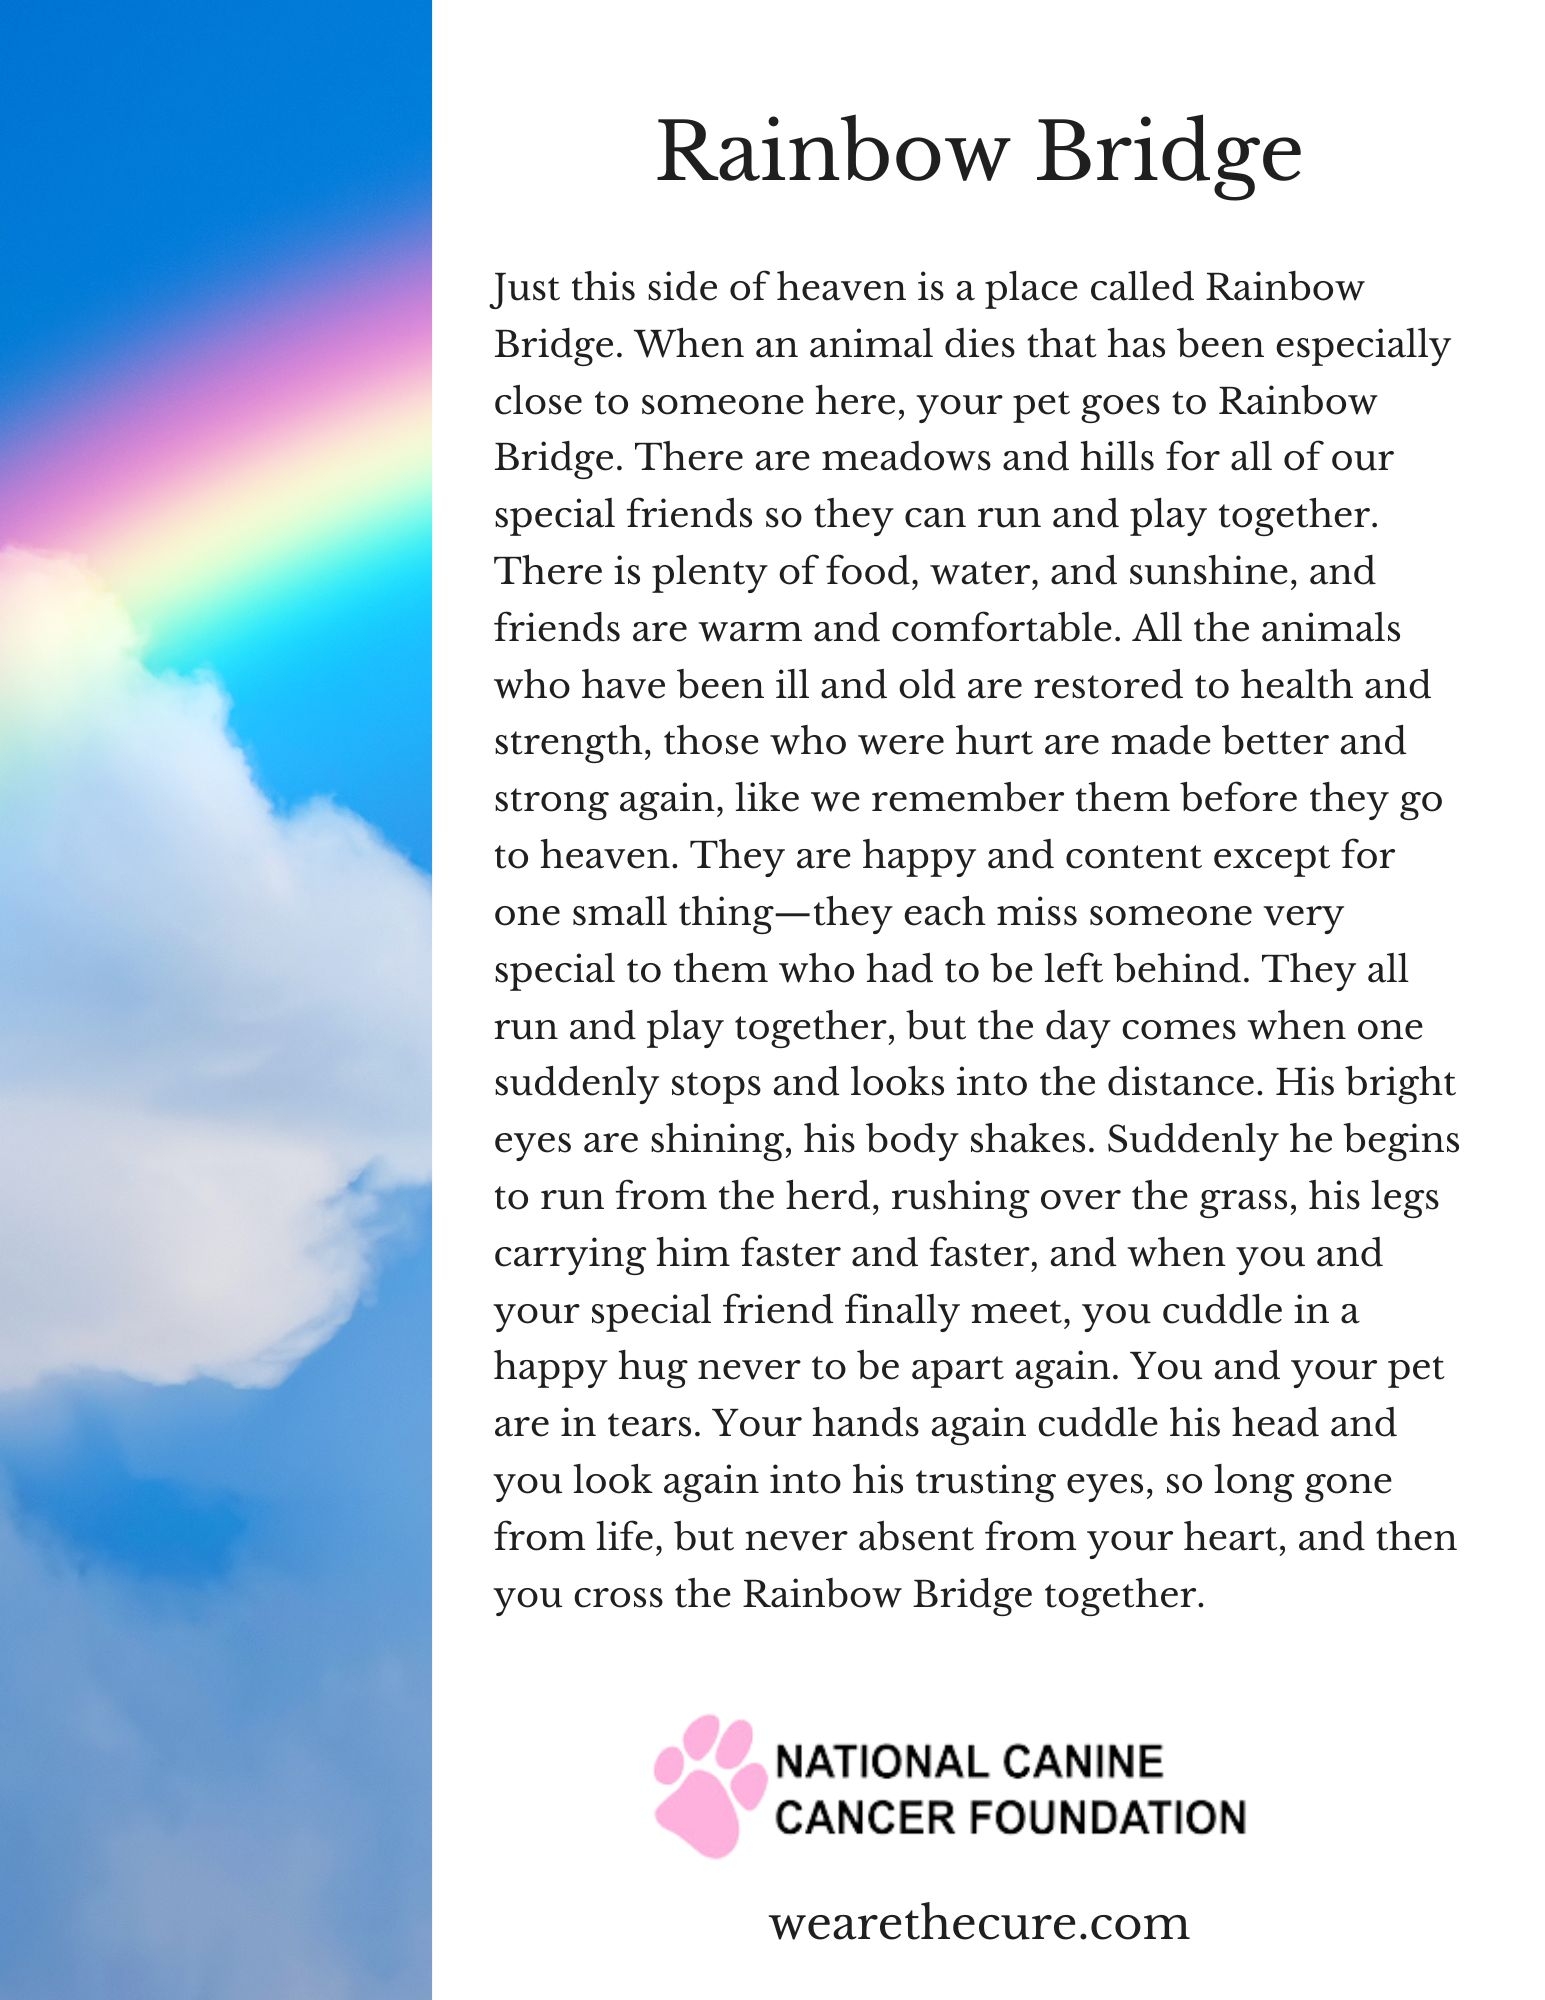 What The Rainbow Bridge Poem Gets Perfectly Right About Pet Loss The National Canine Cancer Foundation